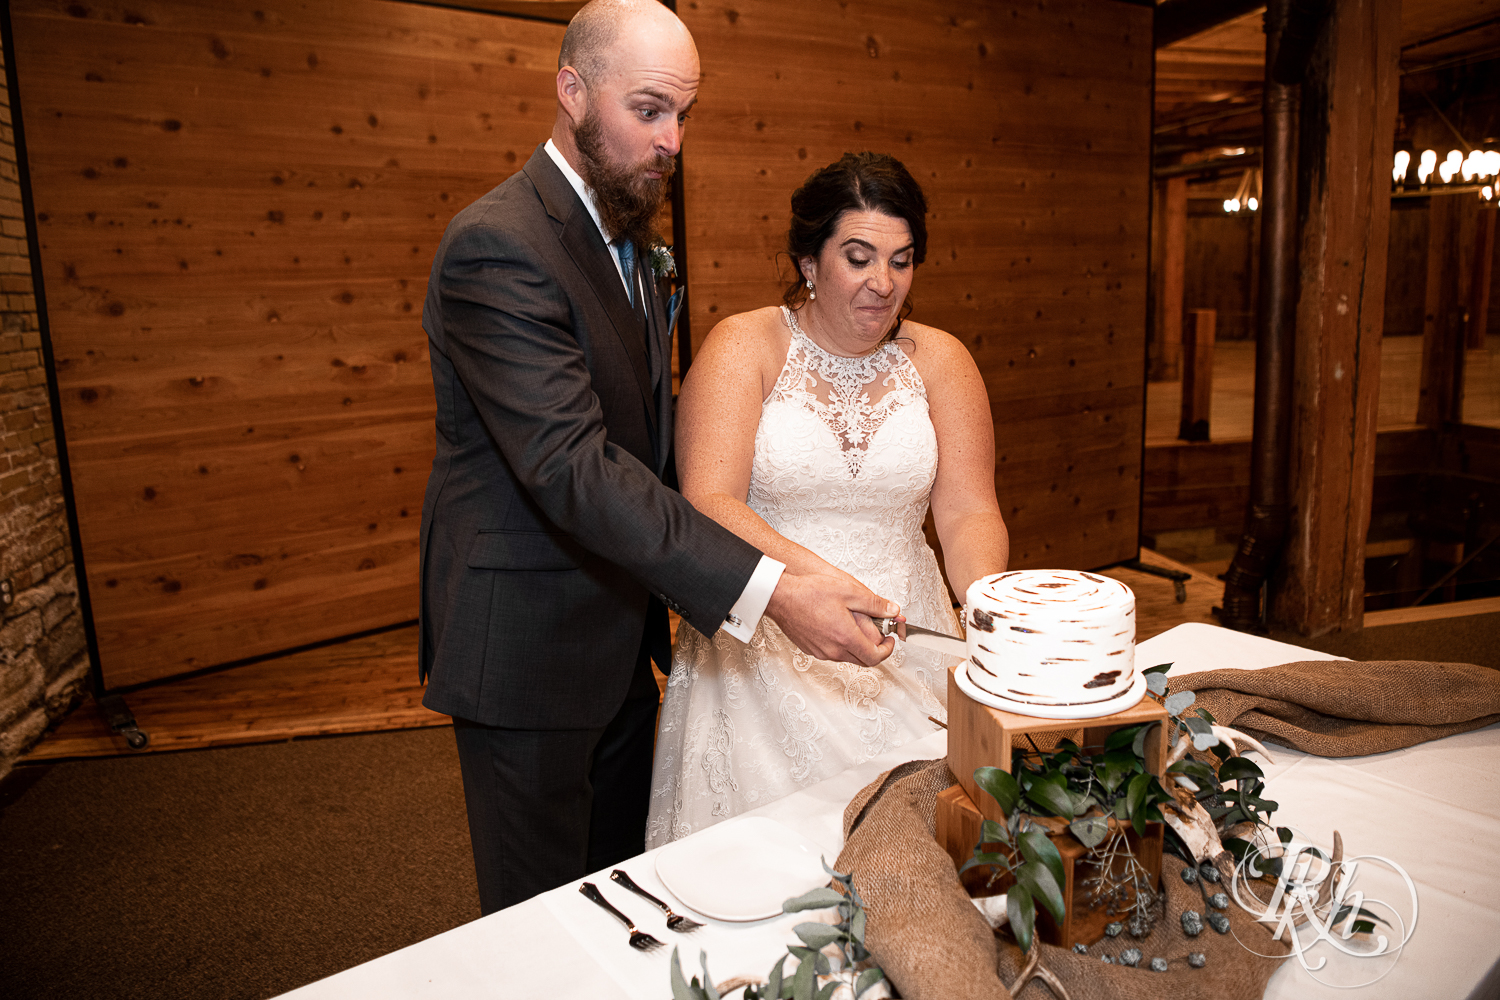 Bride and groom cut wedding cake at Minneapolis Event Centers in Minneapolis, Minnesota.